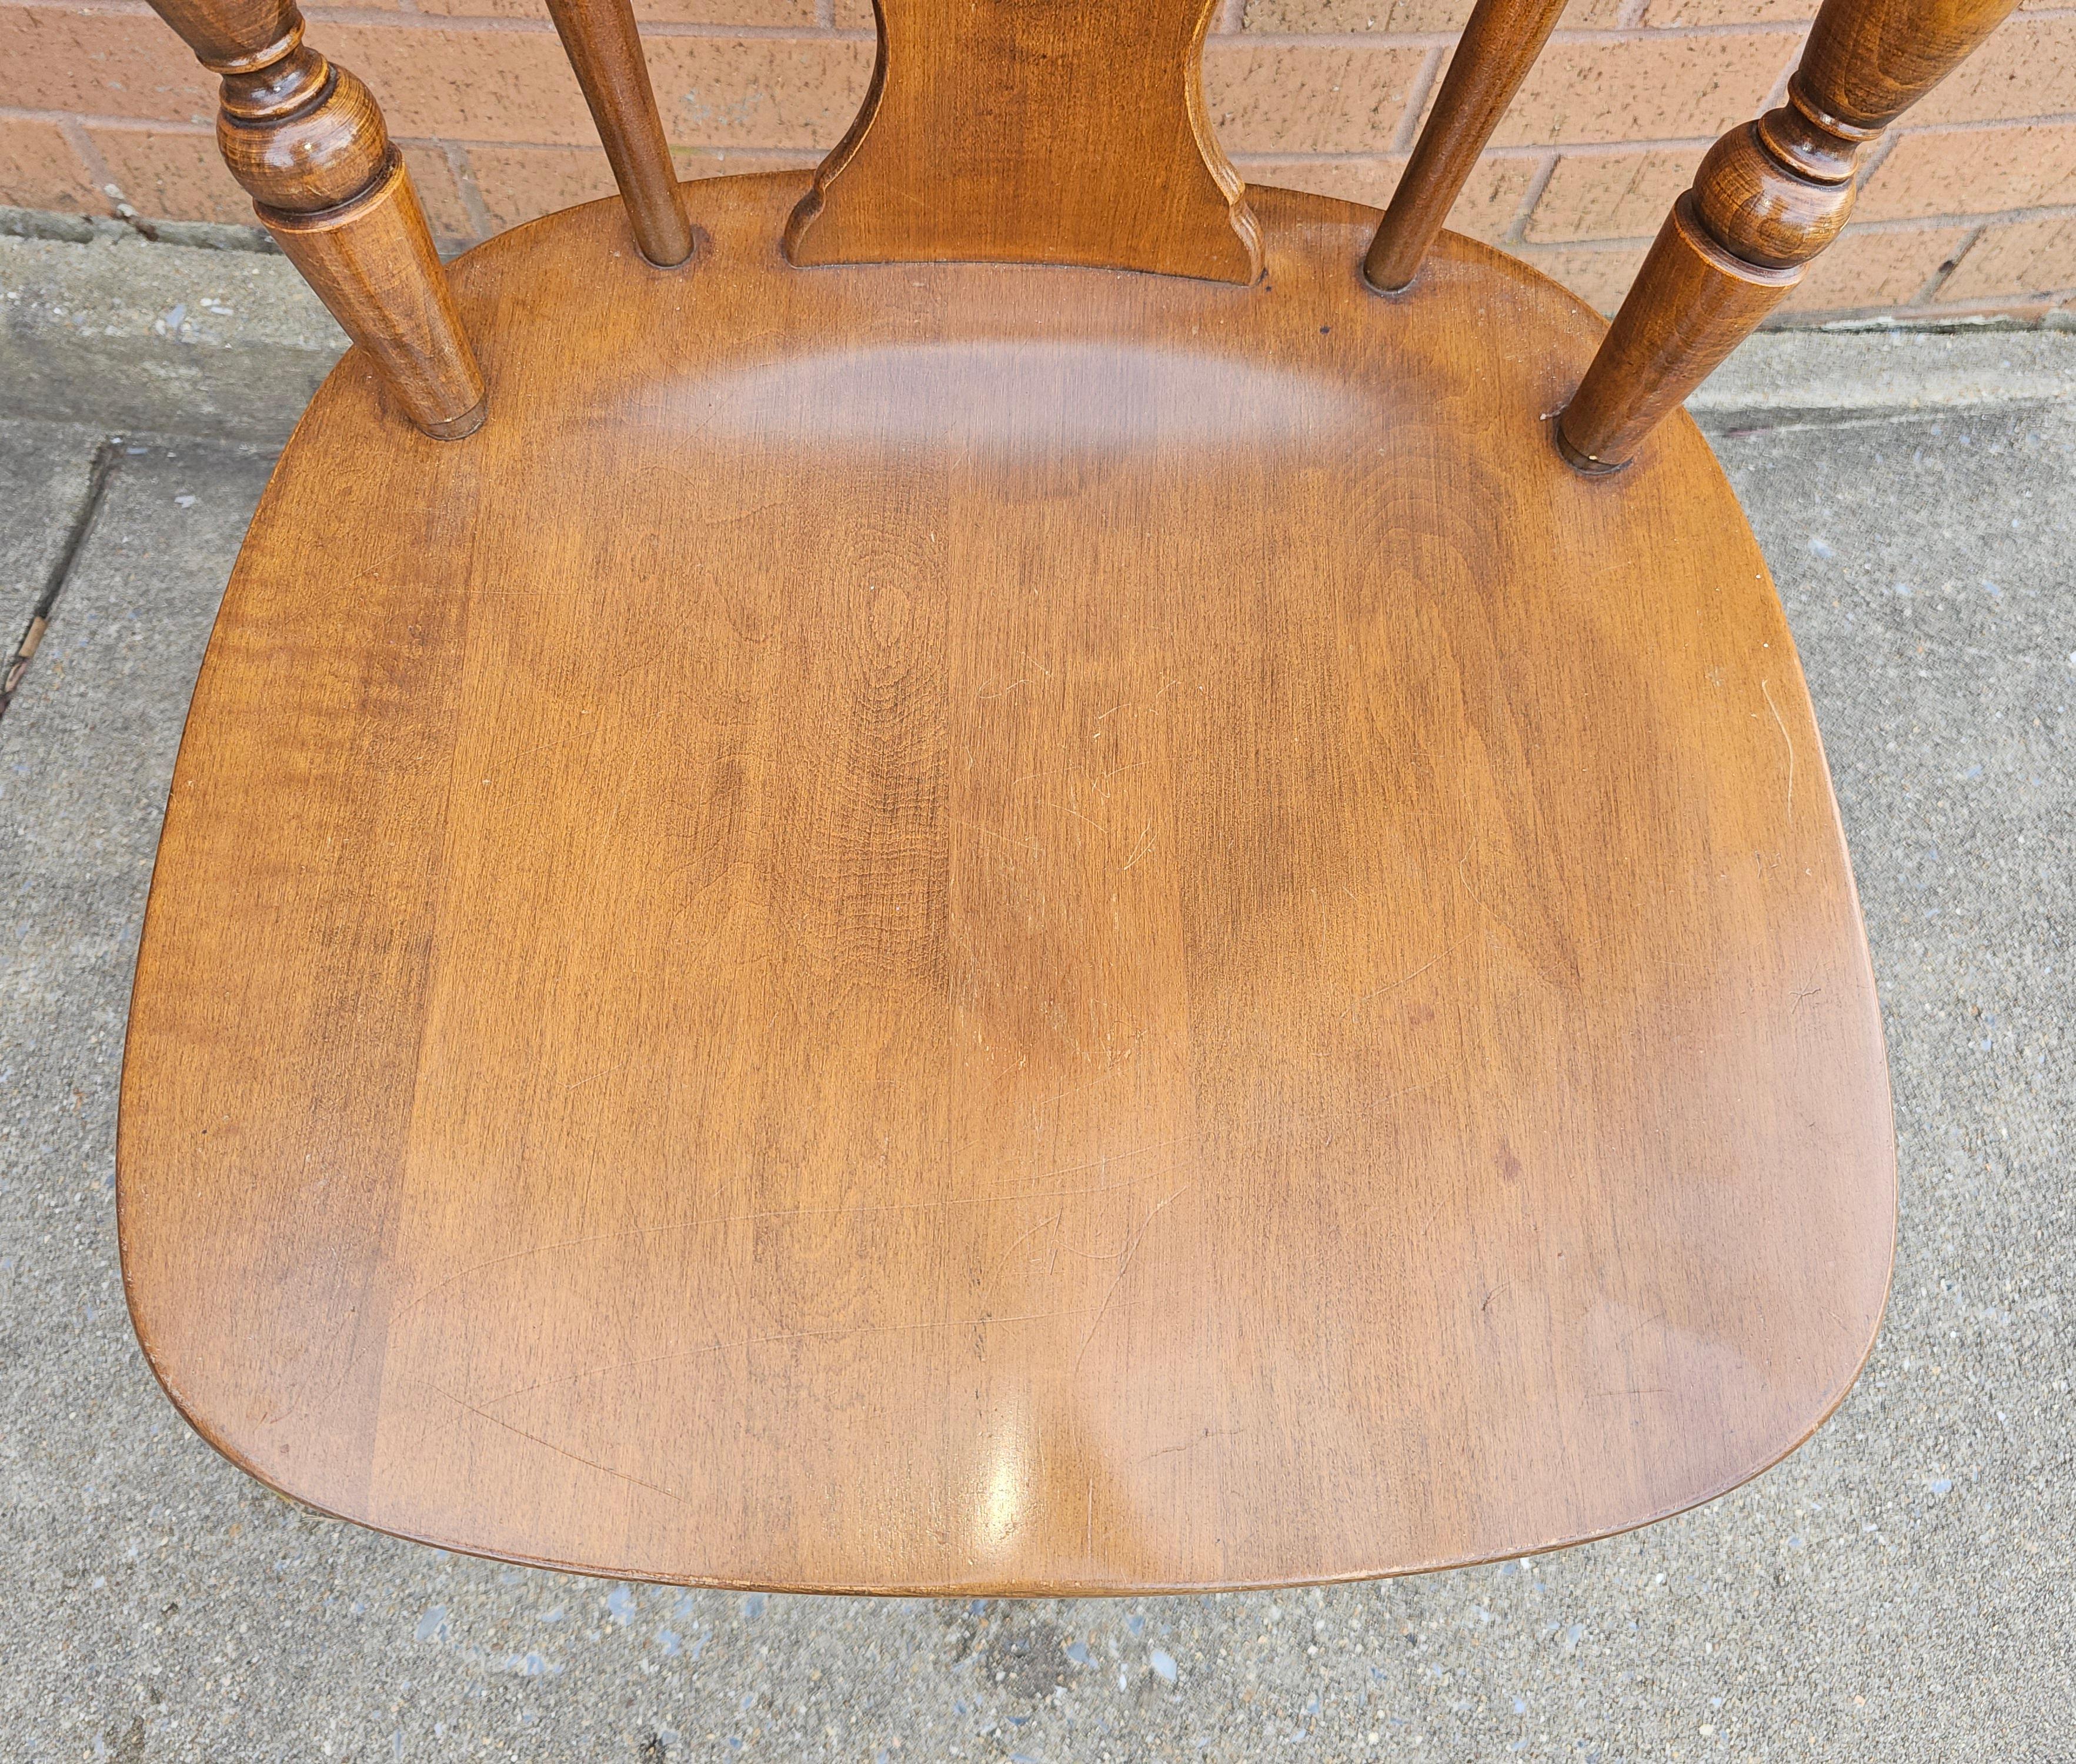 Set 4 Heywood Wakefield Hard Rock Maple Cinnamon Colonial Style Splat Back Chair In Good Condition For Sale In Germantown, MD